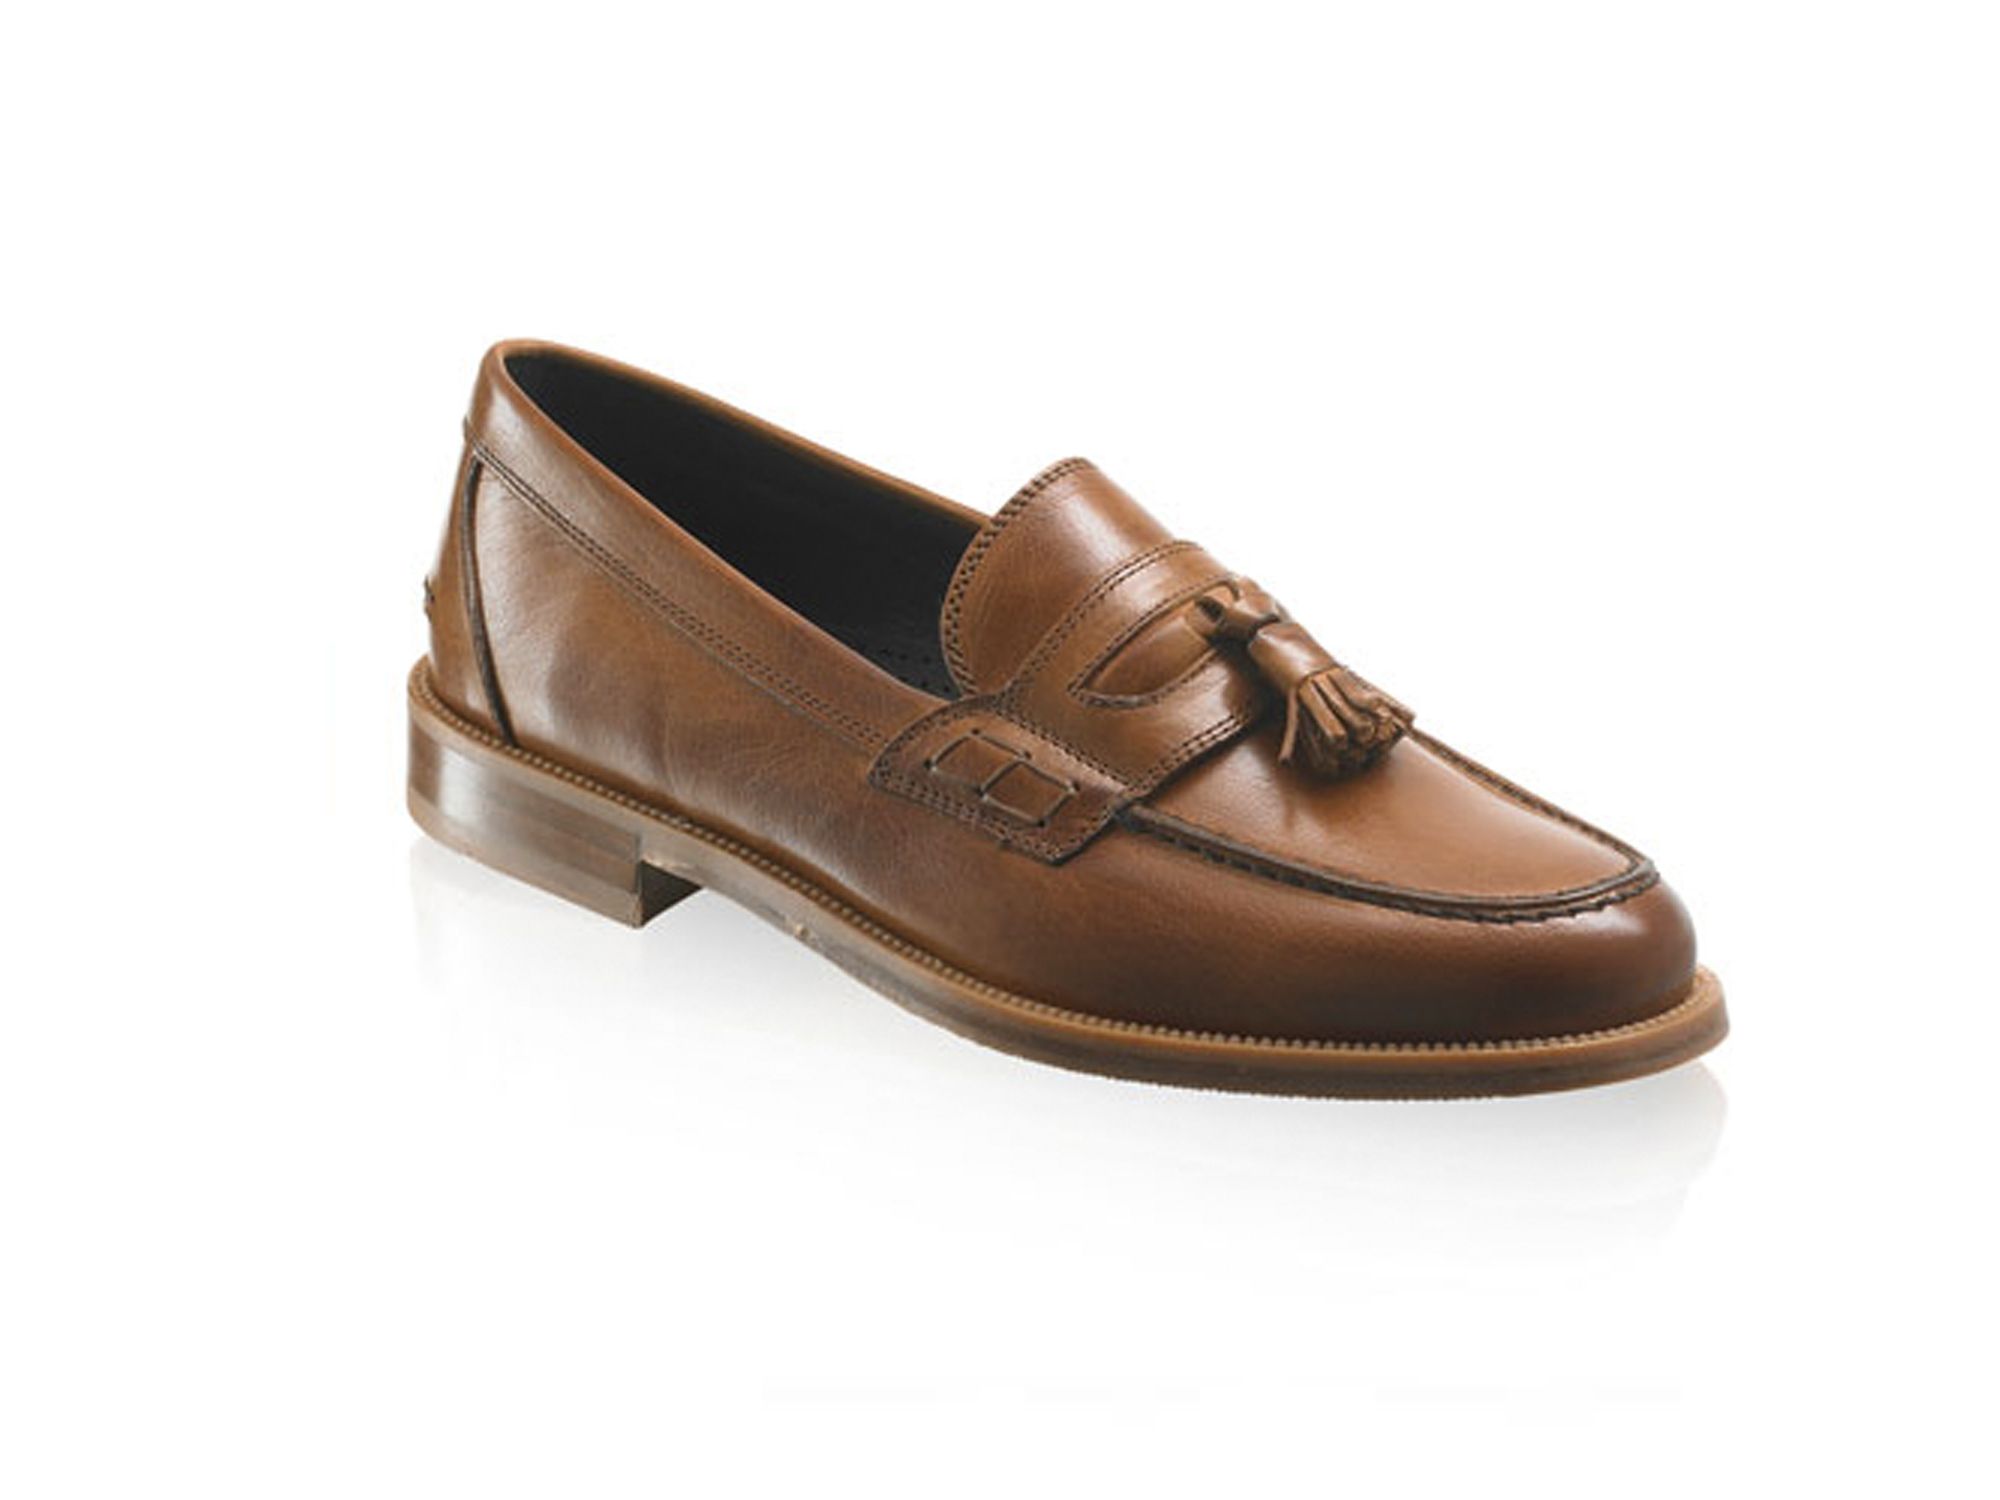 russell and bromley loafers review